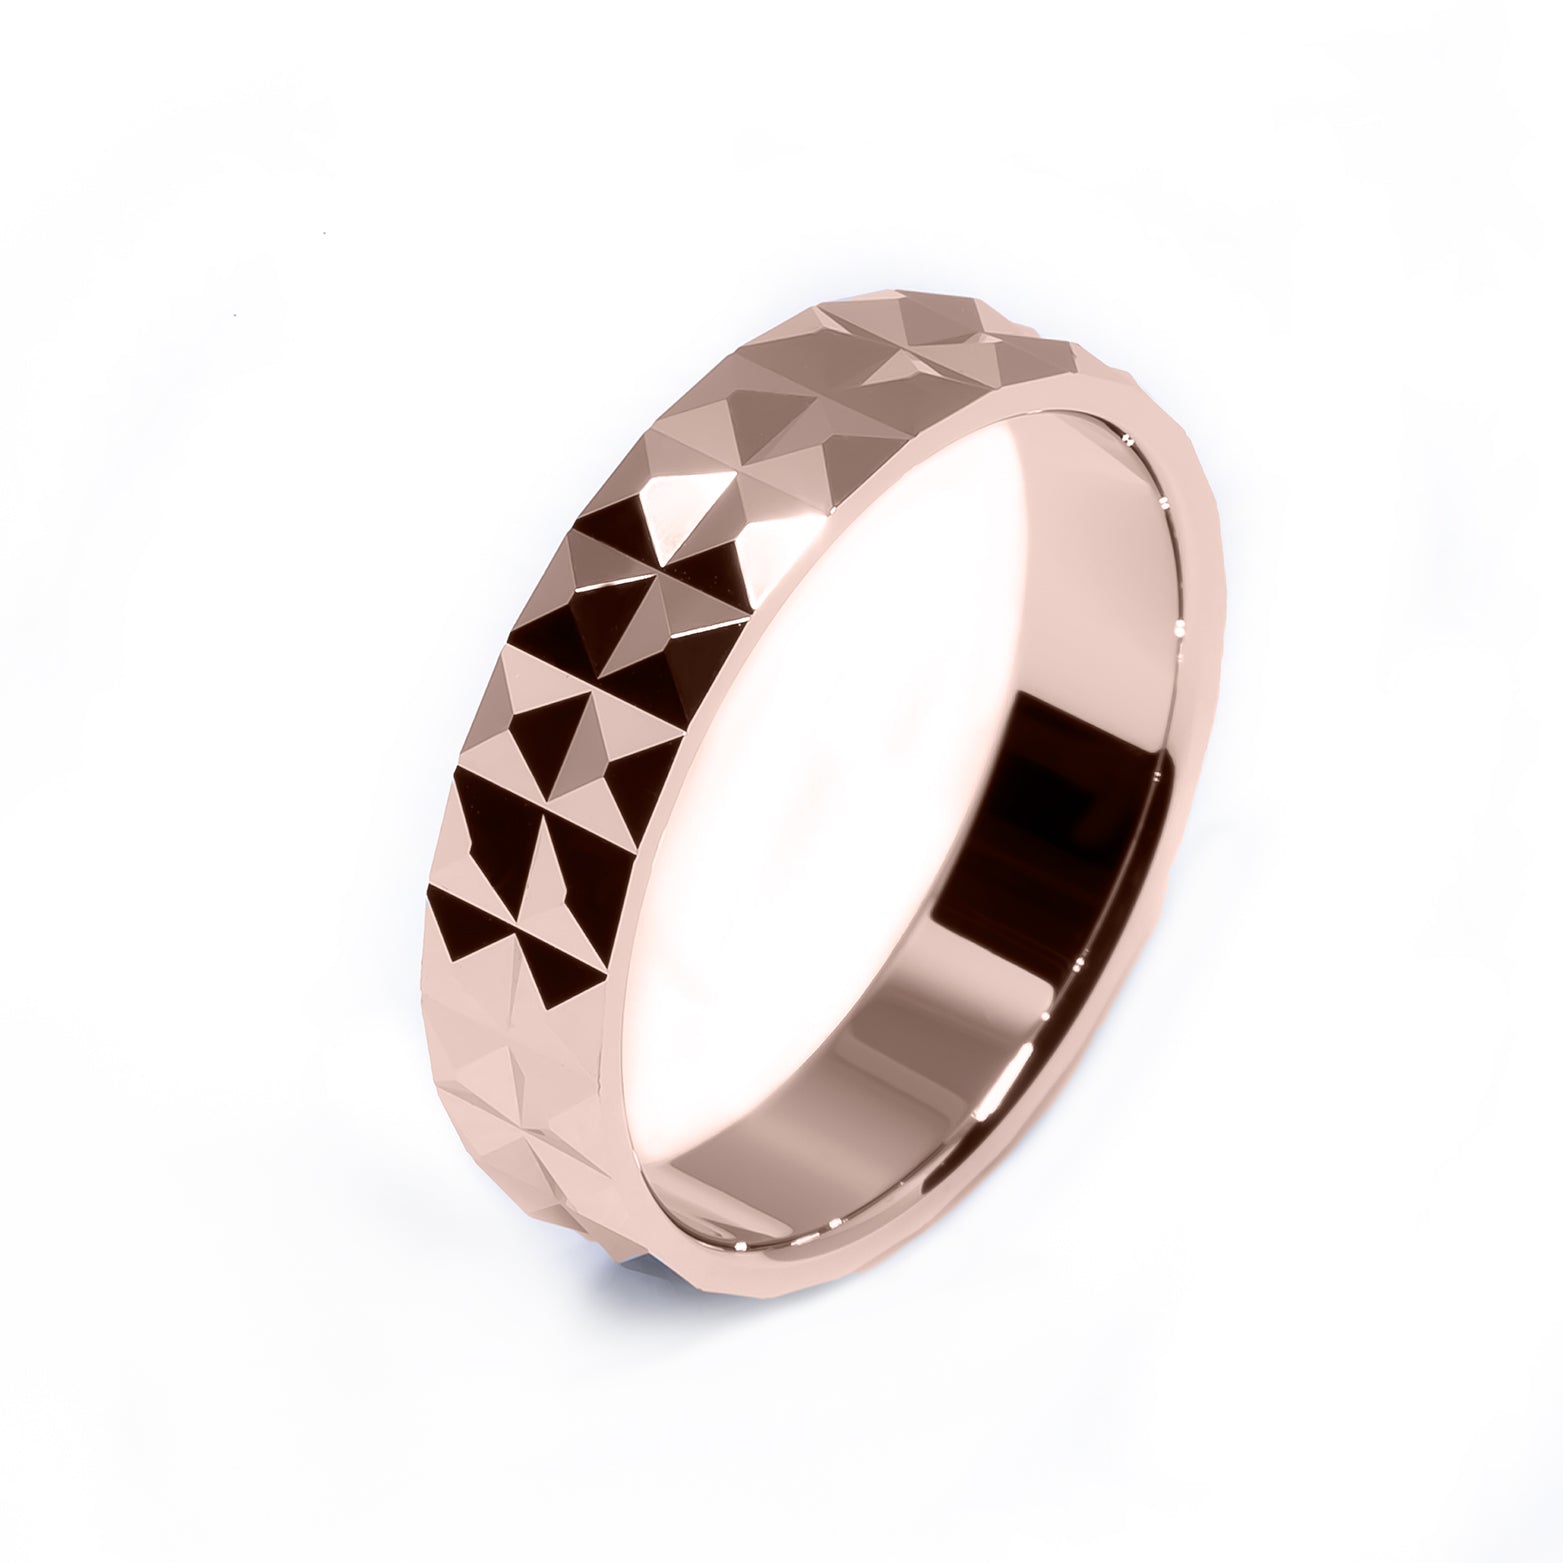 Ring CRUSH 4mm multi-pyramid 2 rows red gold 18K 750